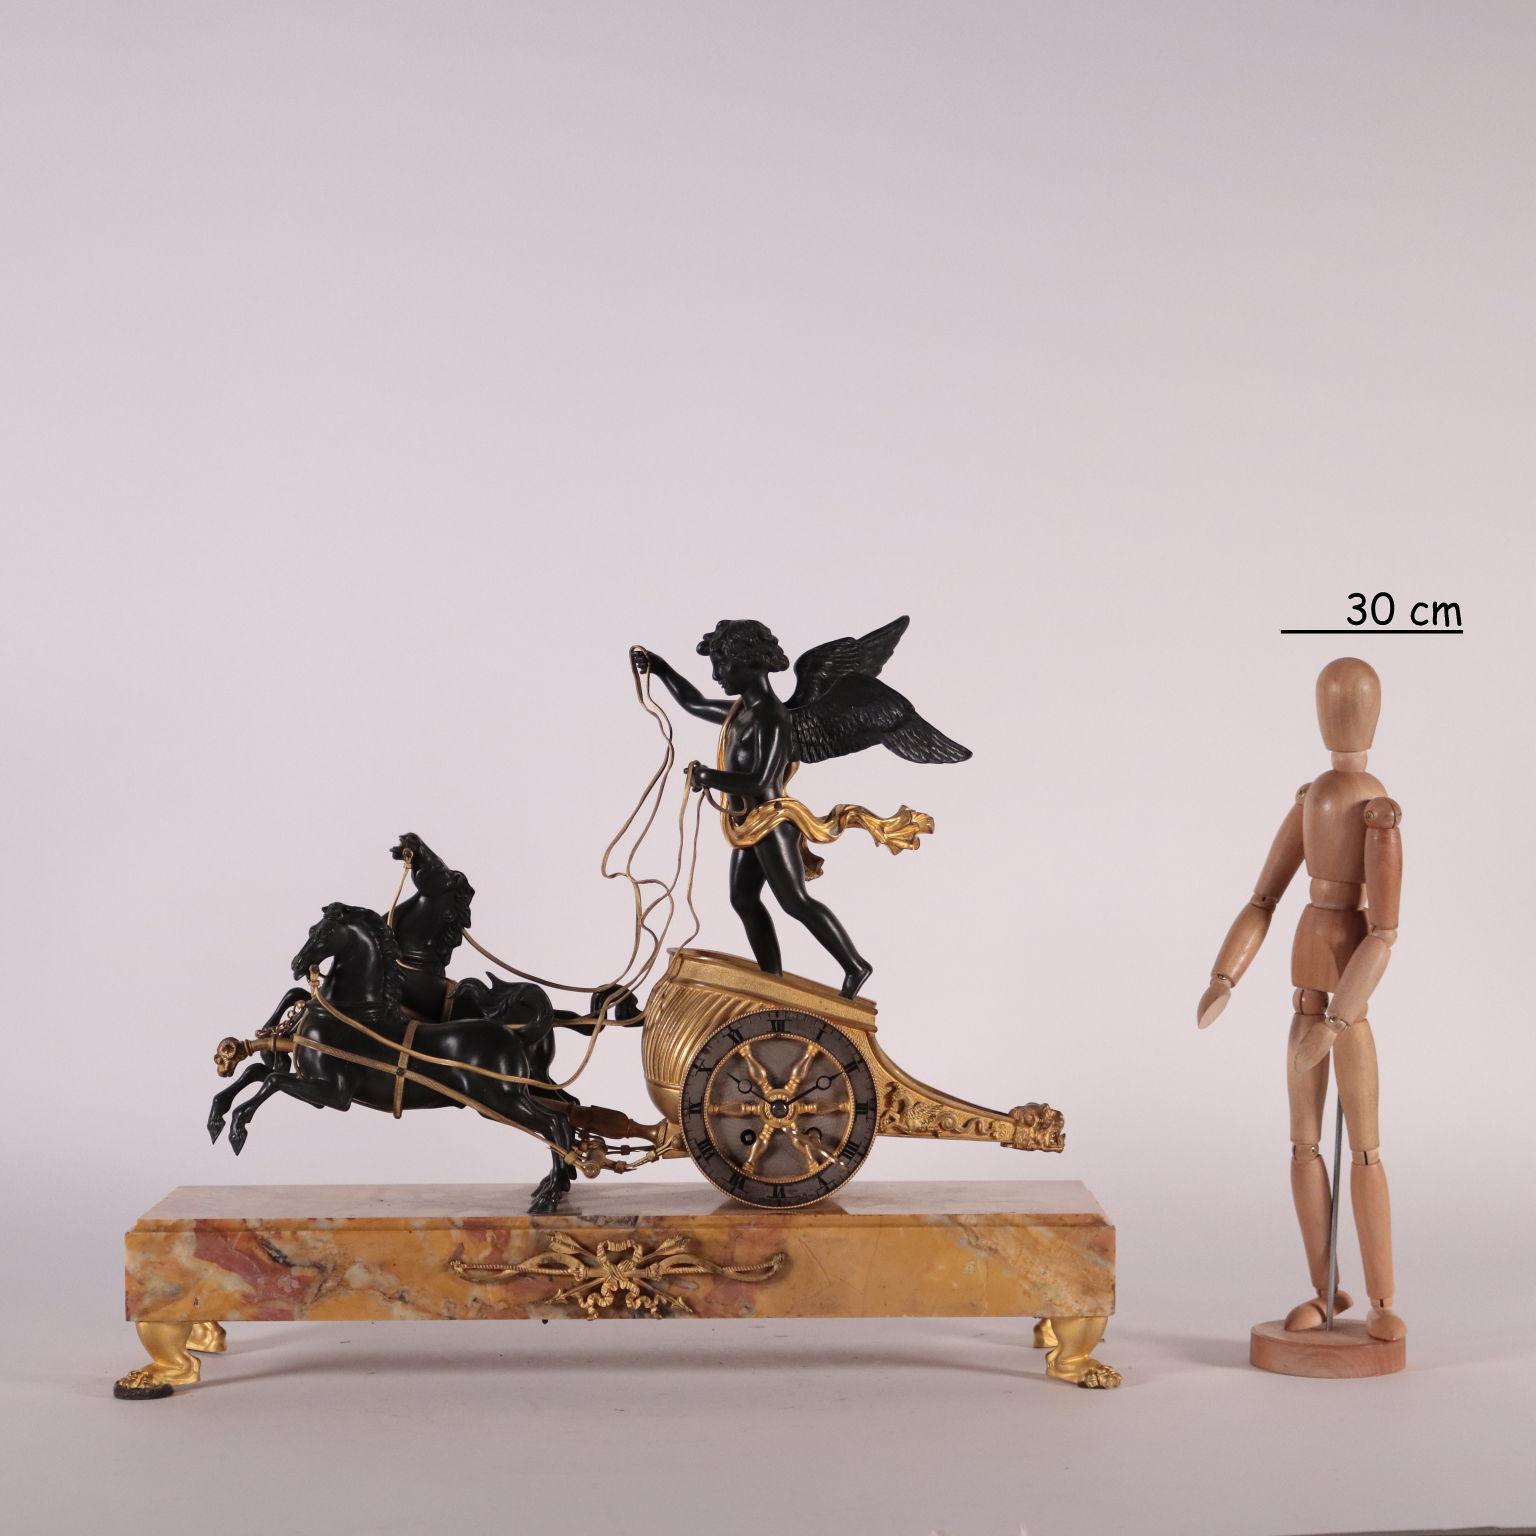 Dark patined gilded bronze table clock with yellow marble of Siena base supported by 4 gilded bronze ferin-shaped feet. The clock is surmounted by winged Cupid on a horse-drawn chariot. Vise with roman numbers for hours and mechanism branded